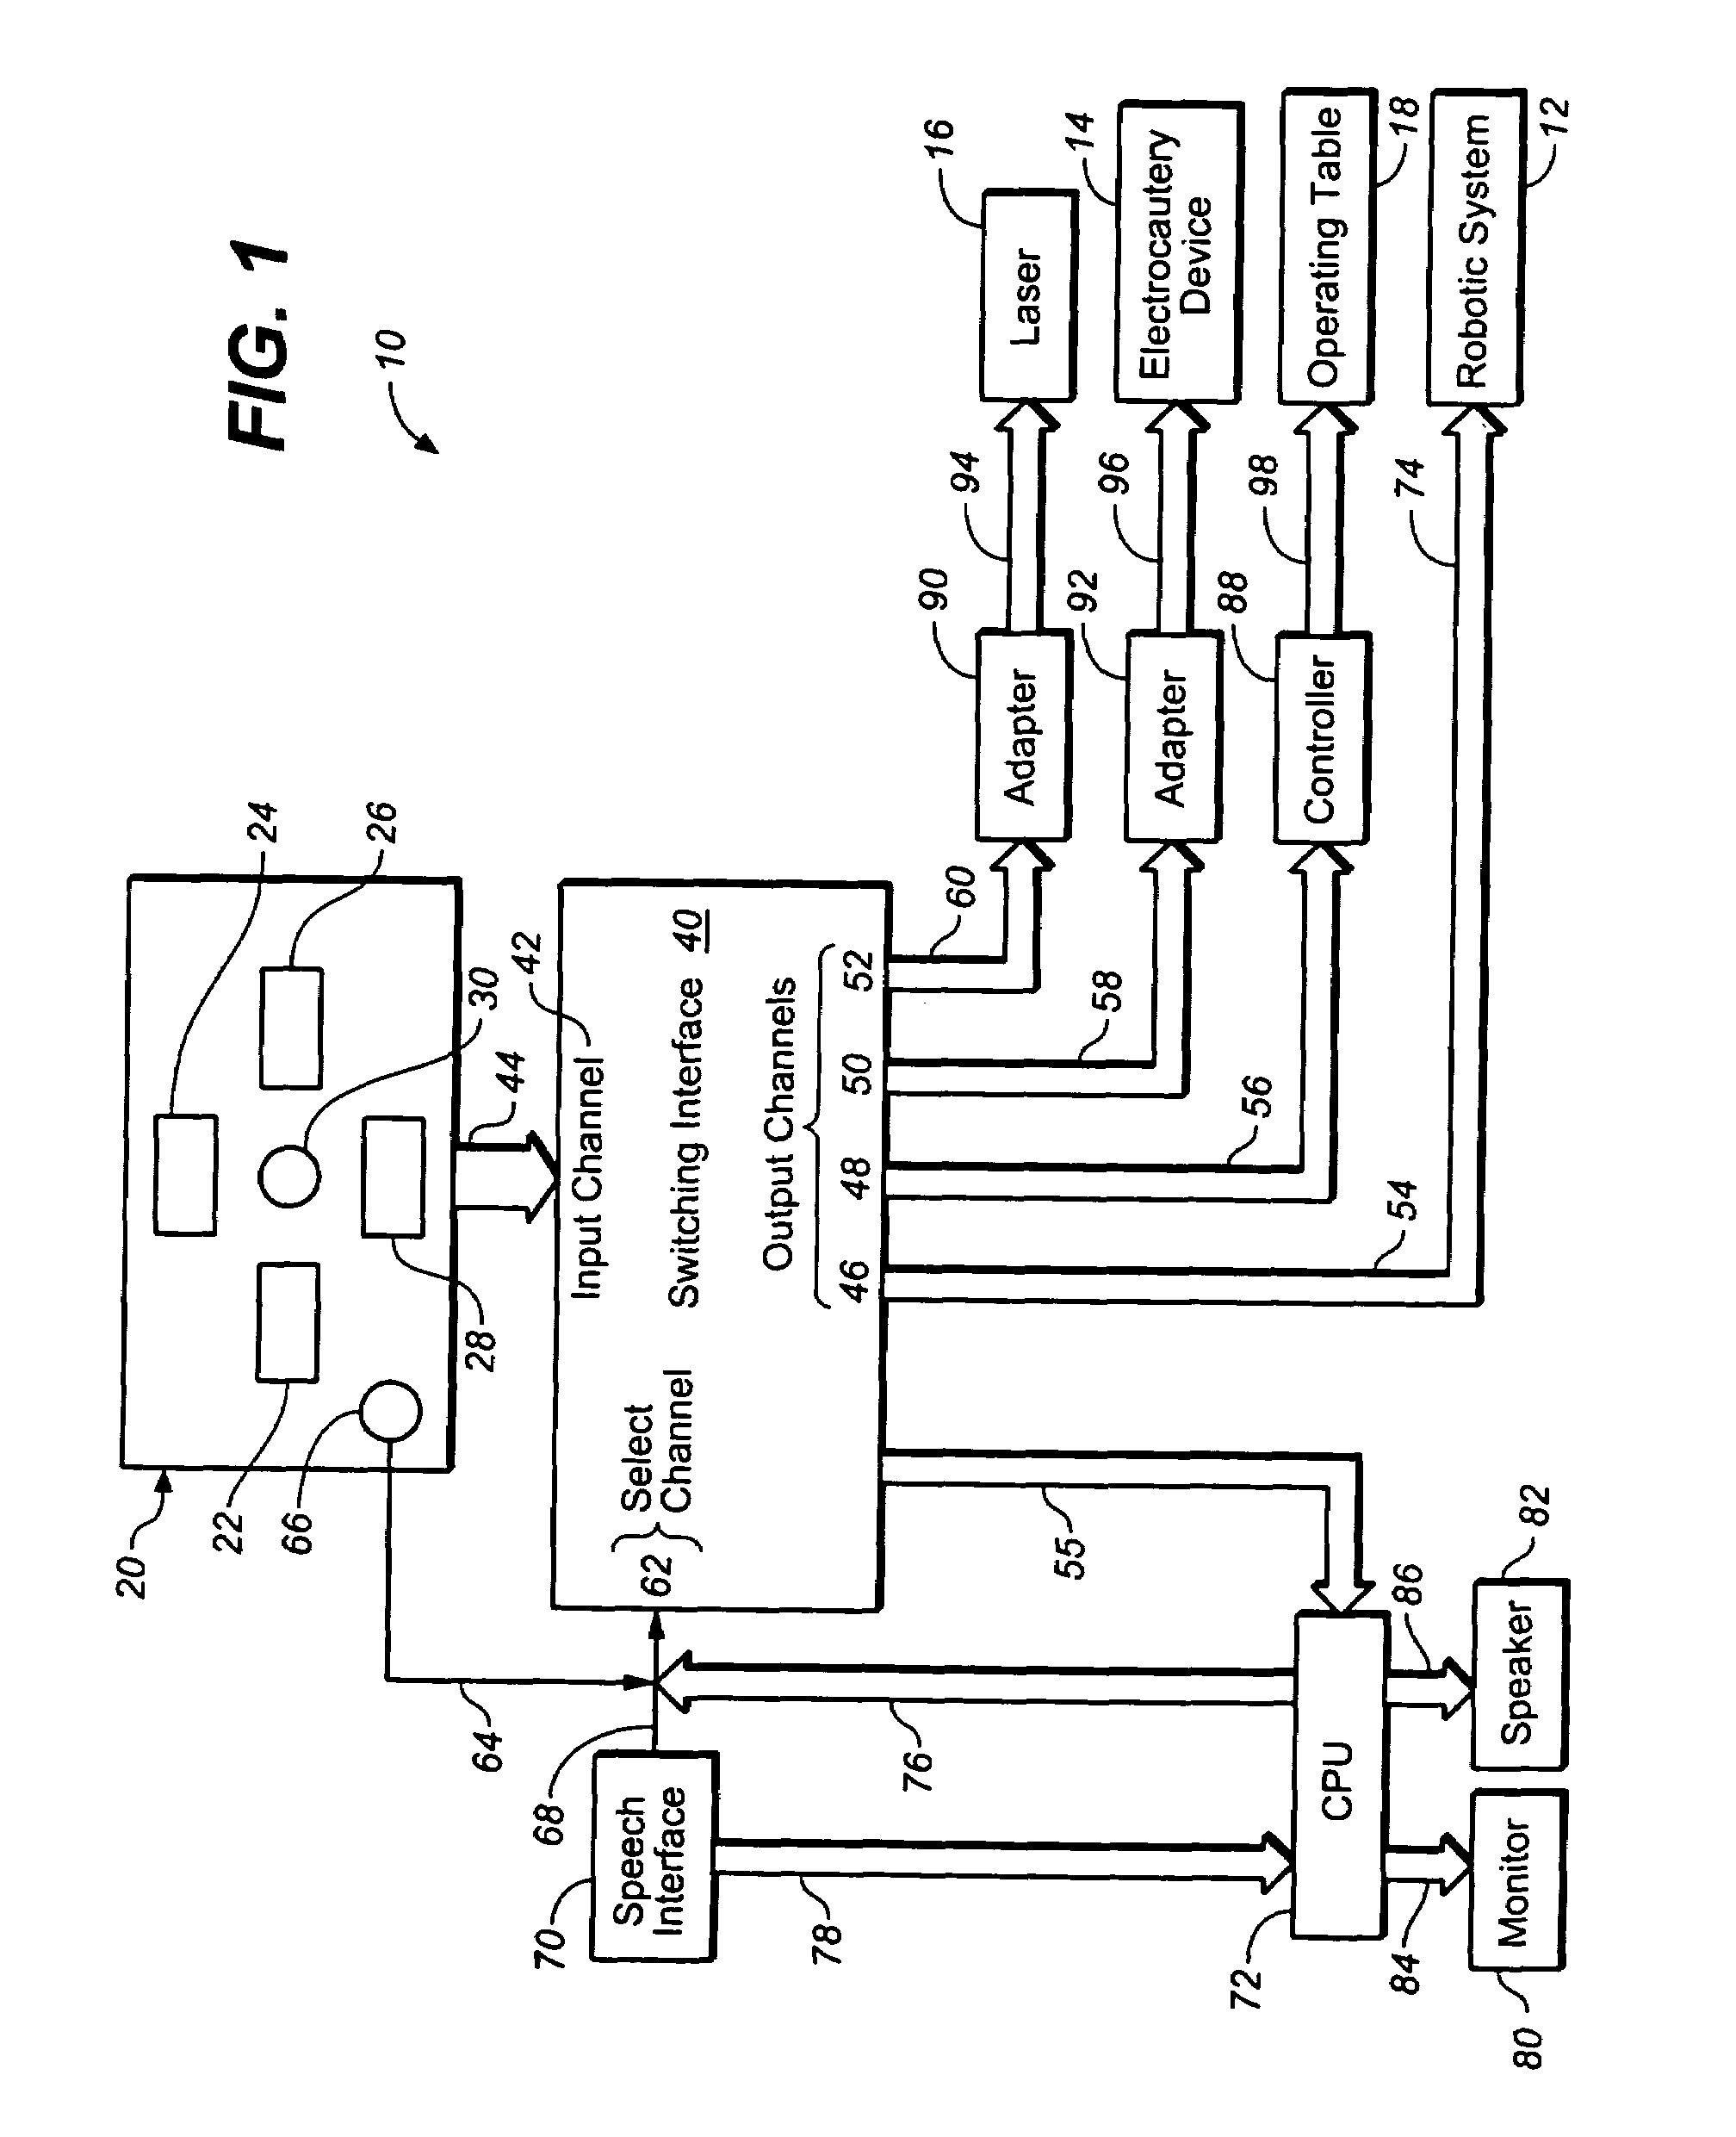 Multi-functional surgical control system and switching interface